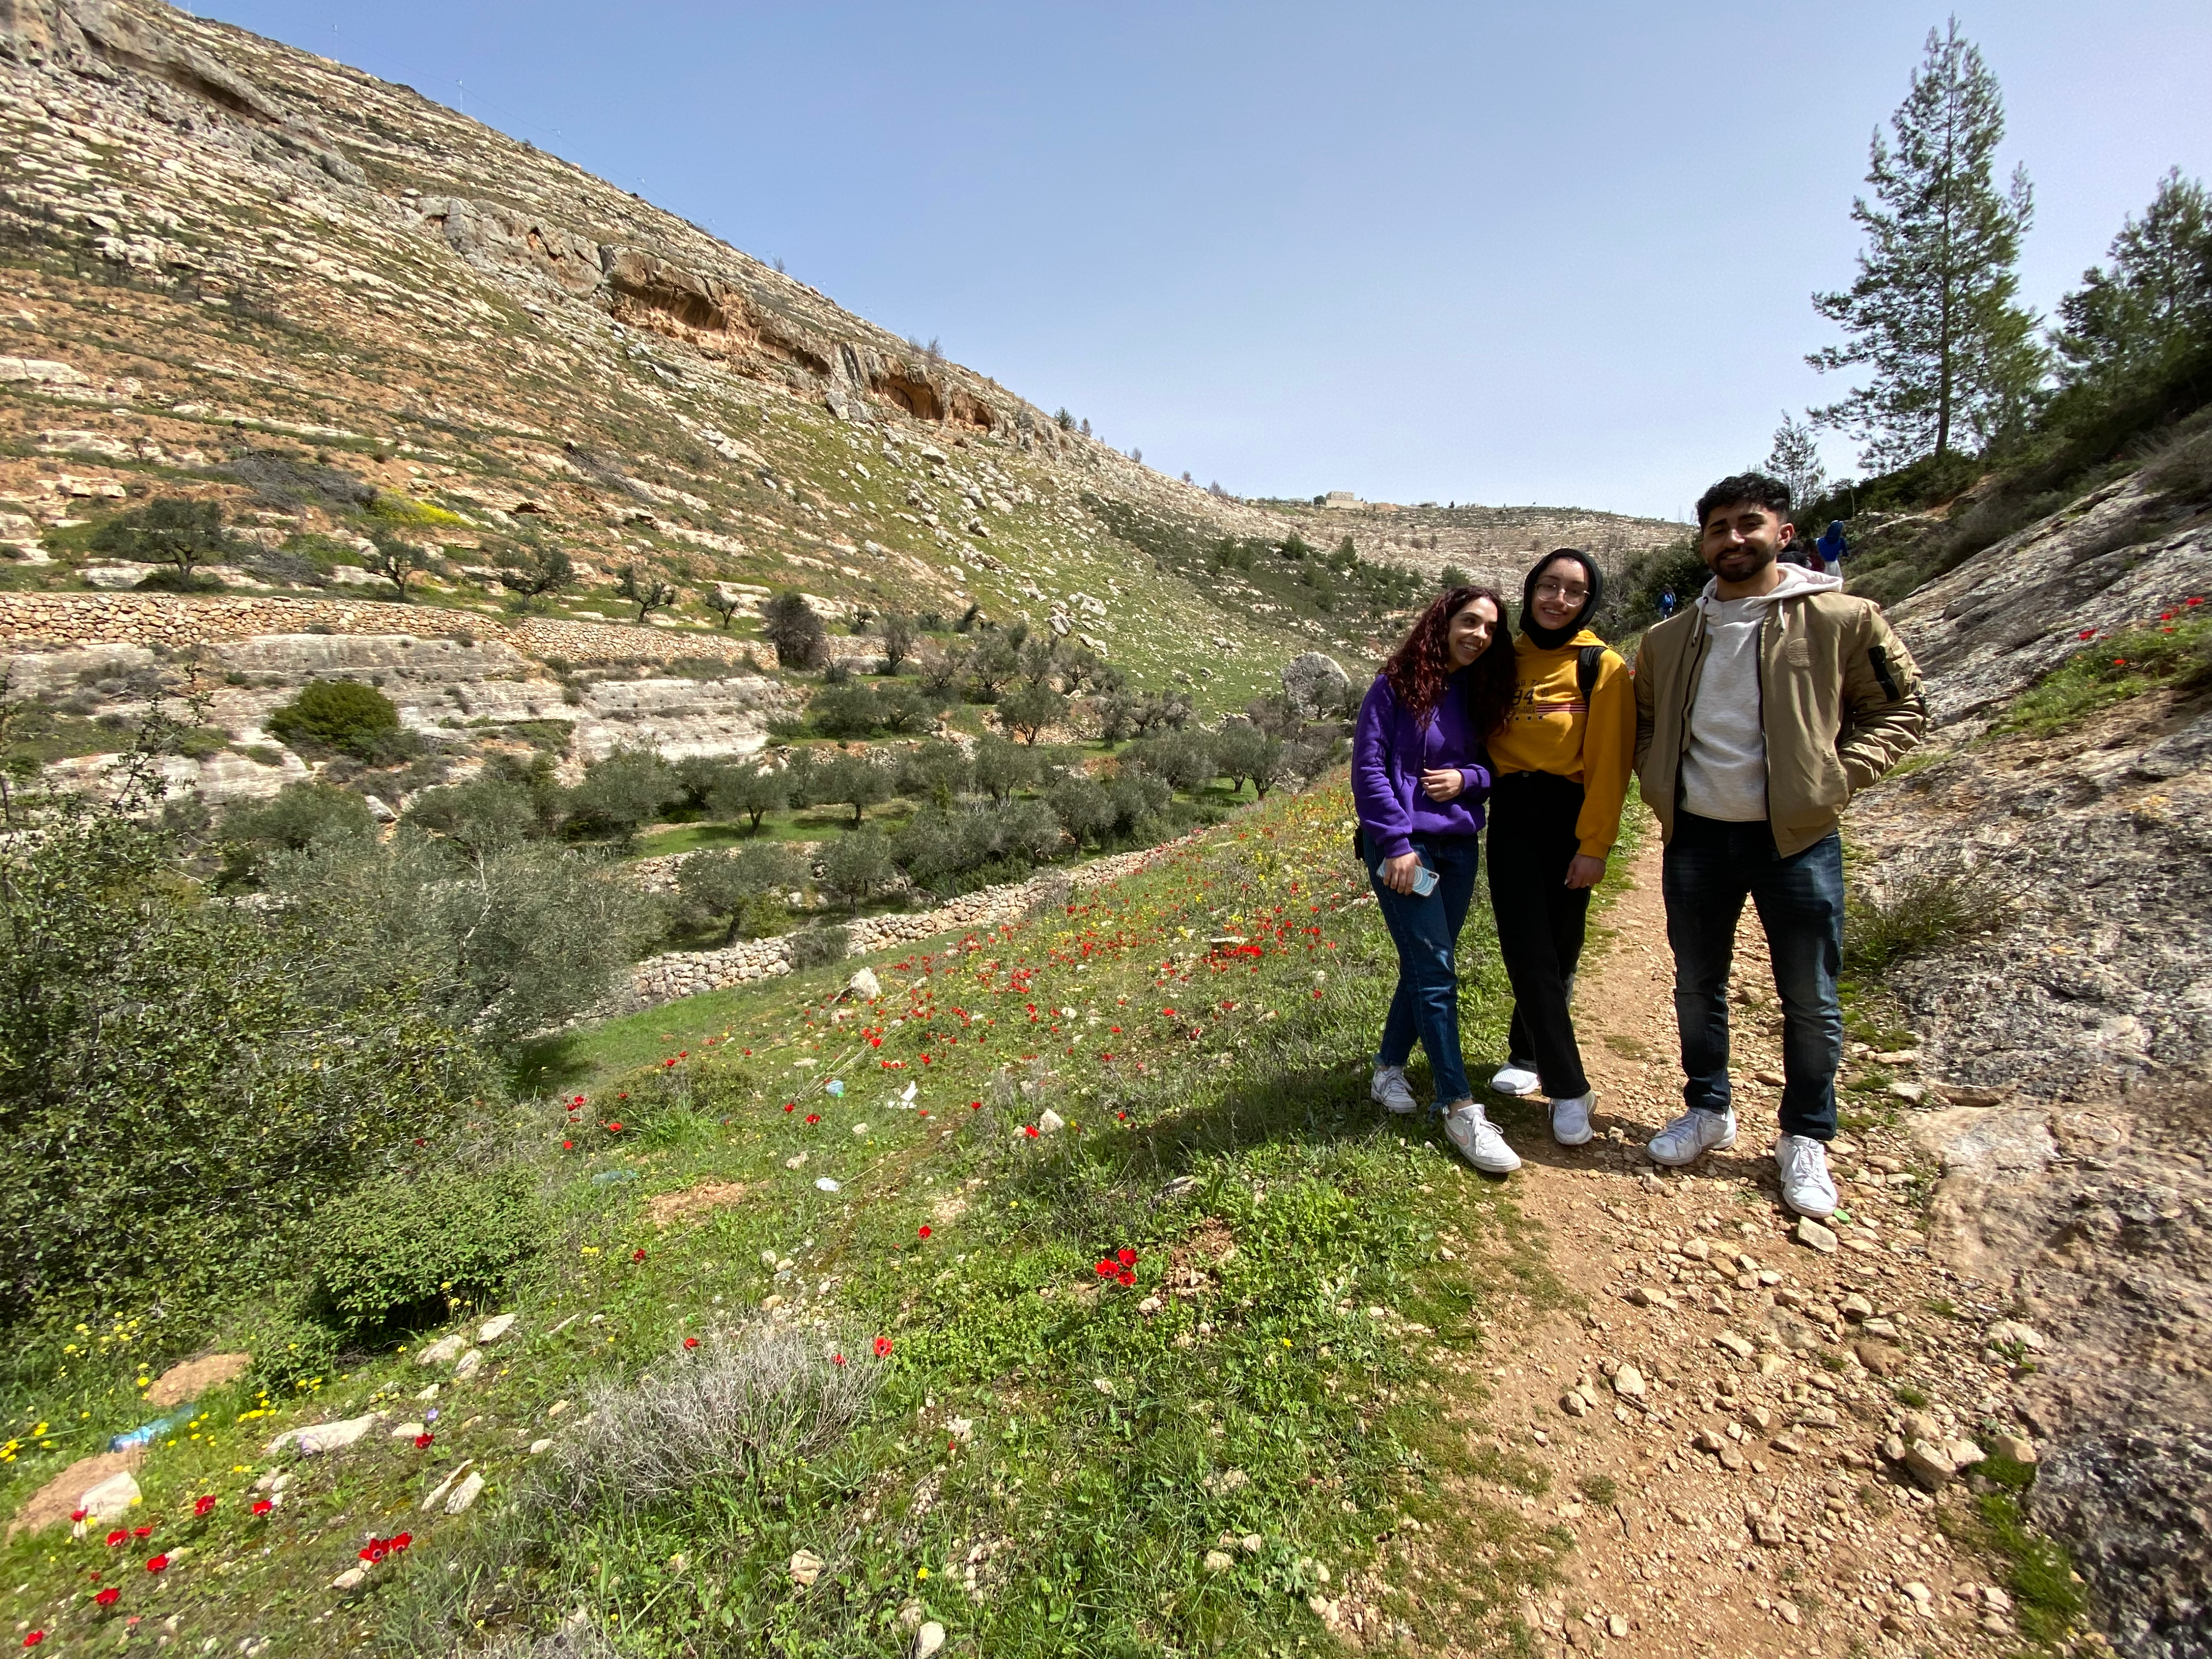 Three students pose on the trail next to a hill.